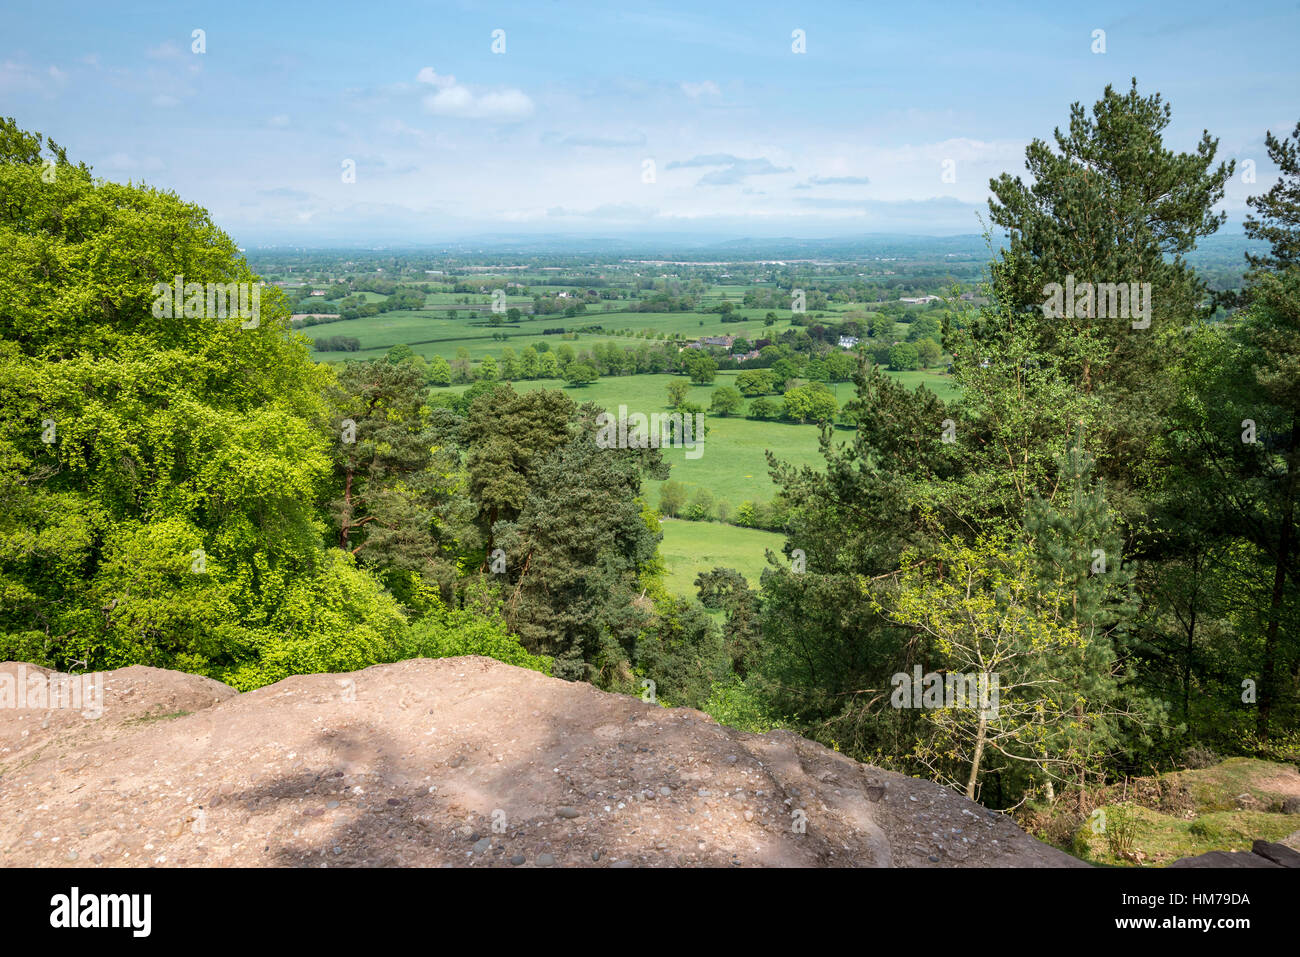 View of Cheshire countryside from Stormy point, Alderley edge, England. Stock Photo